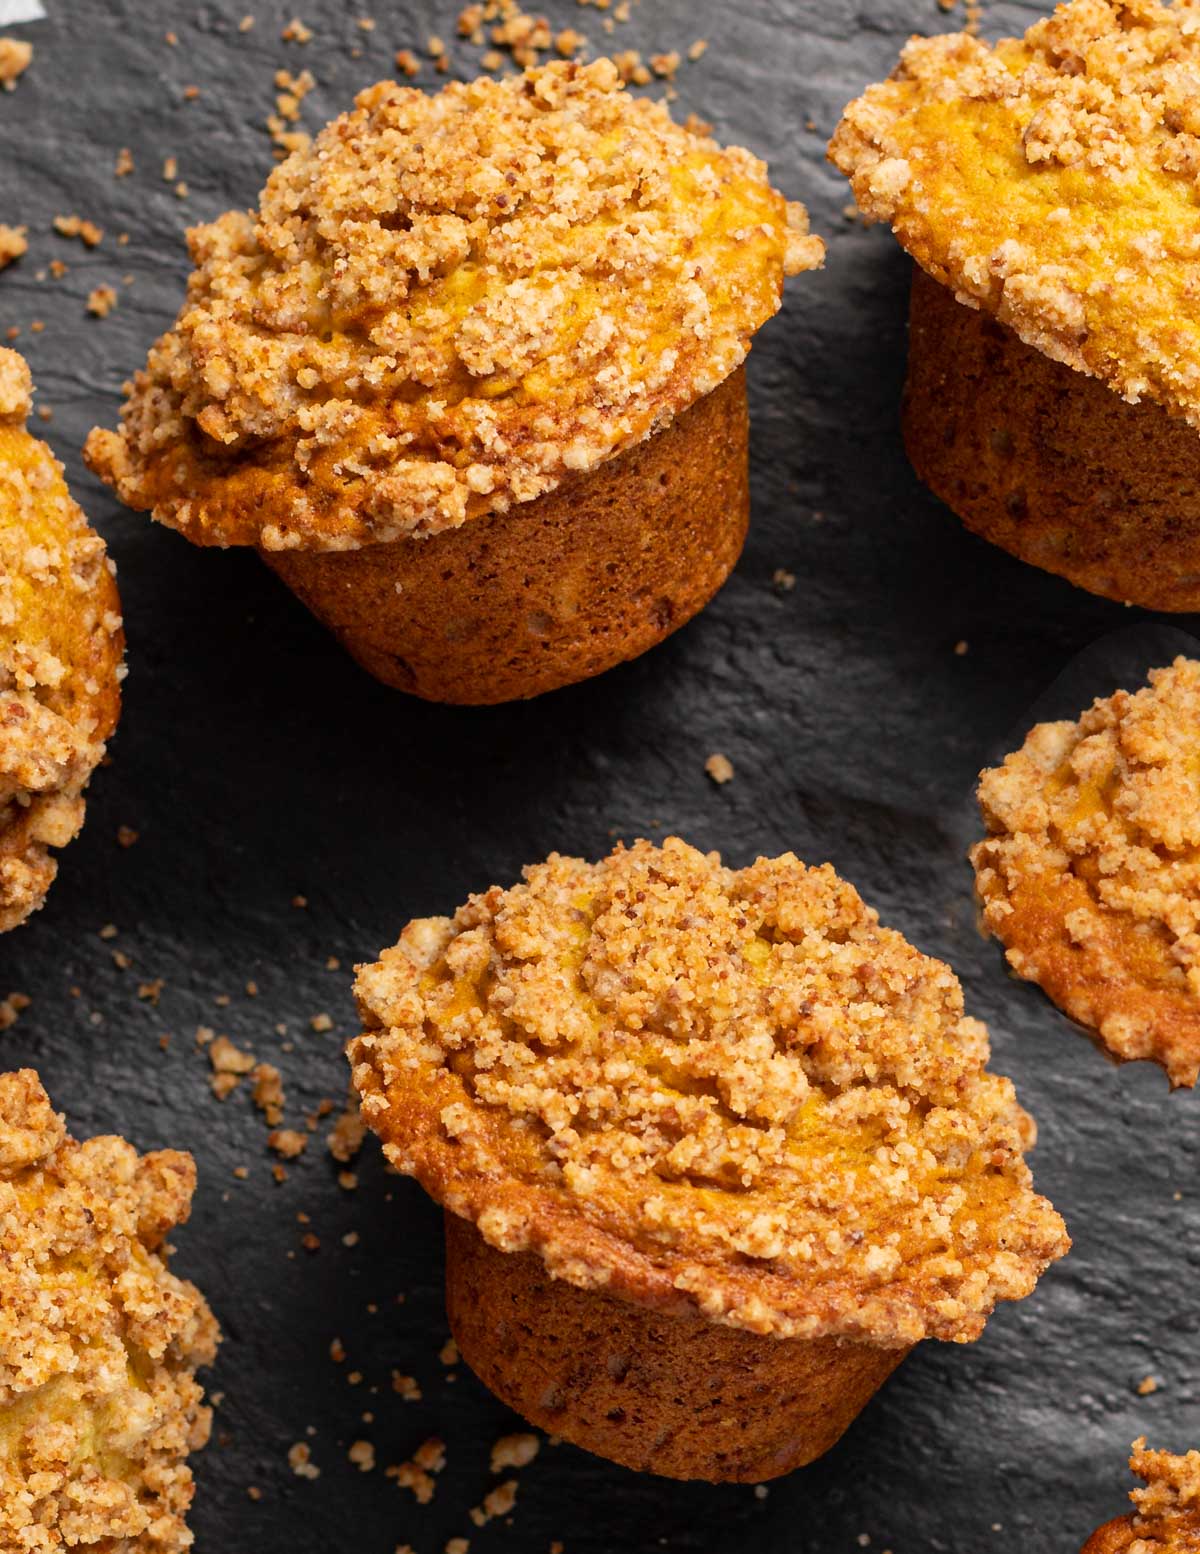 Muffins with vegan streusel